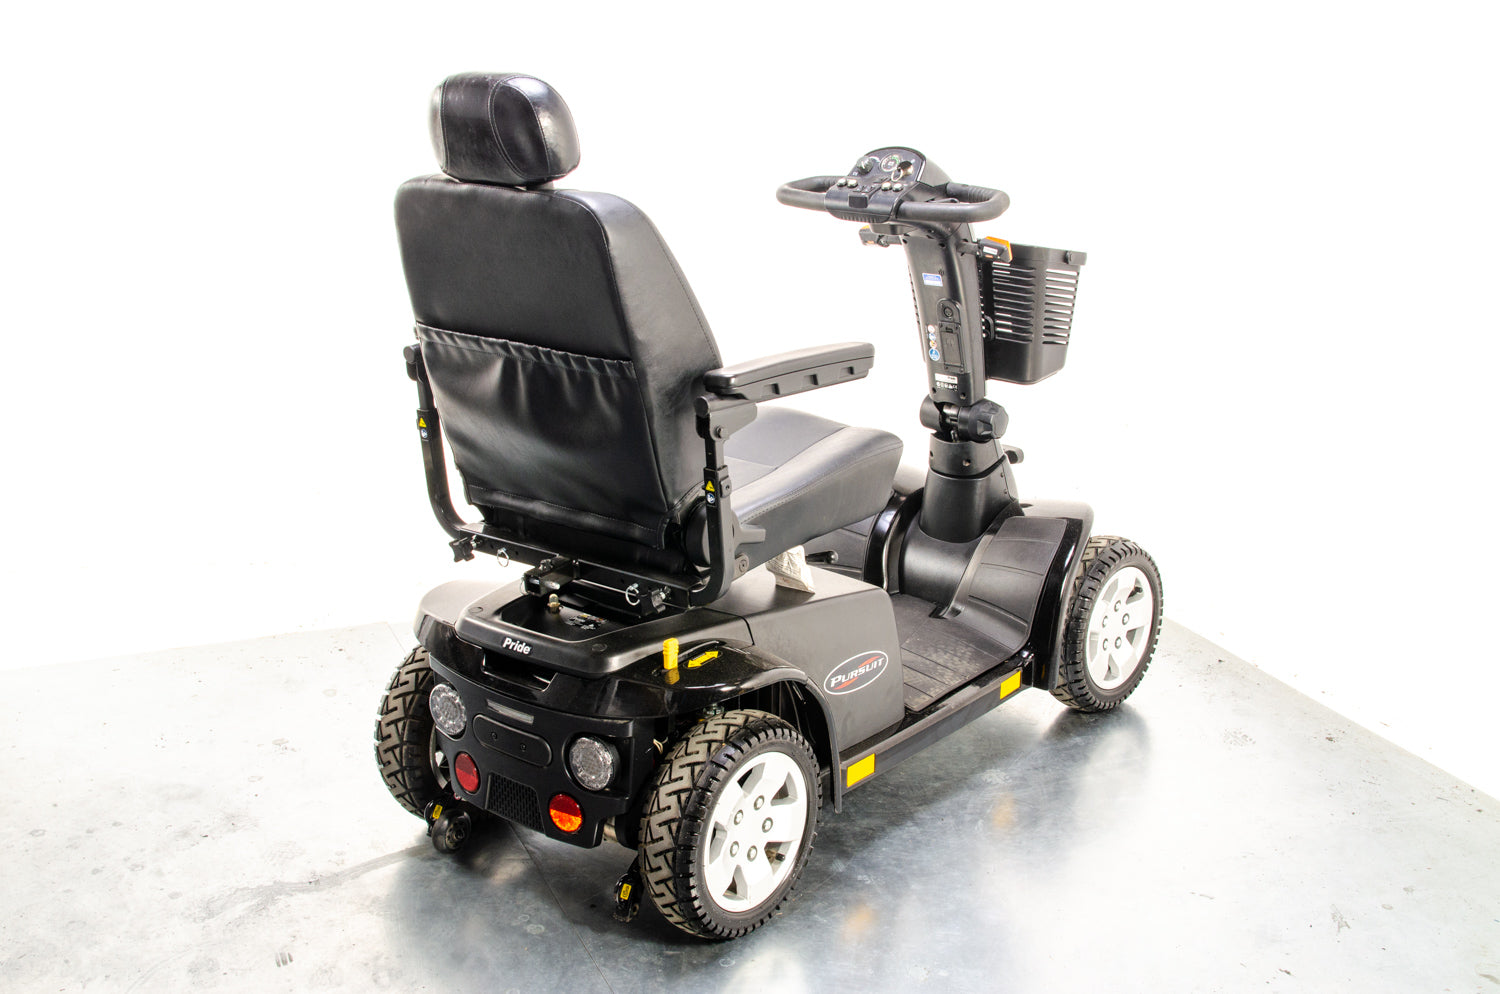 Pride Colt Pursuit All-Terrain Off-Road Used Mobility Scooter 8mph Transportable Large Off-Road Road Legal Black 13952